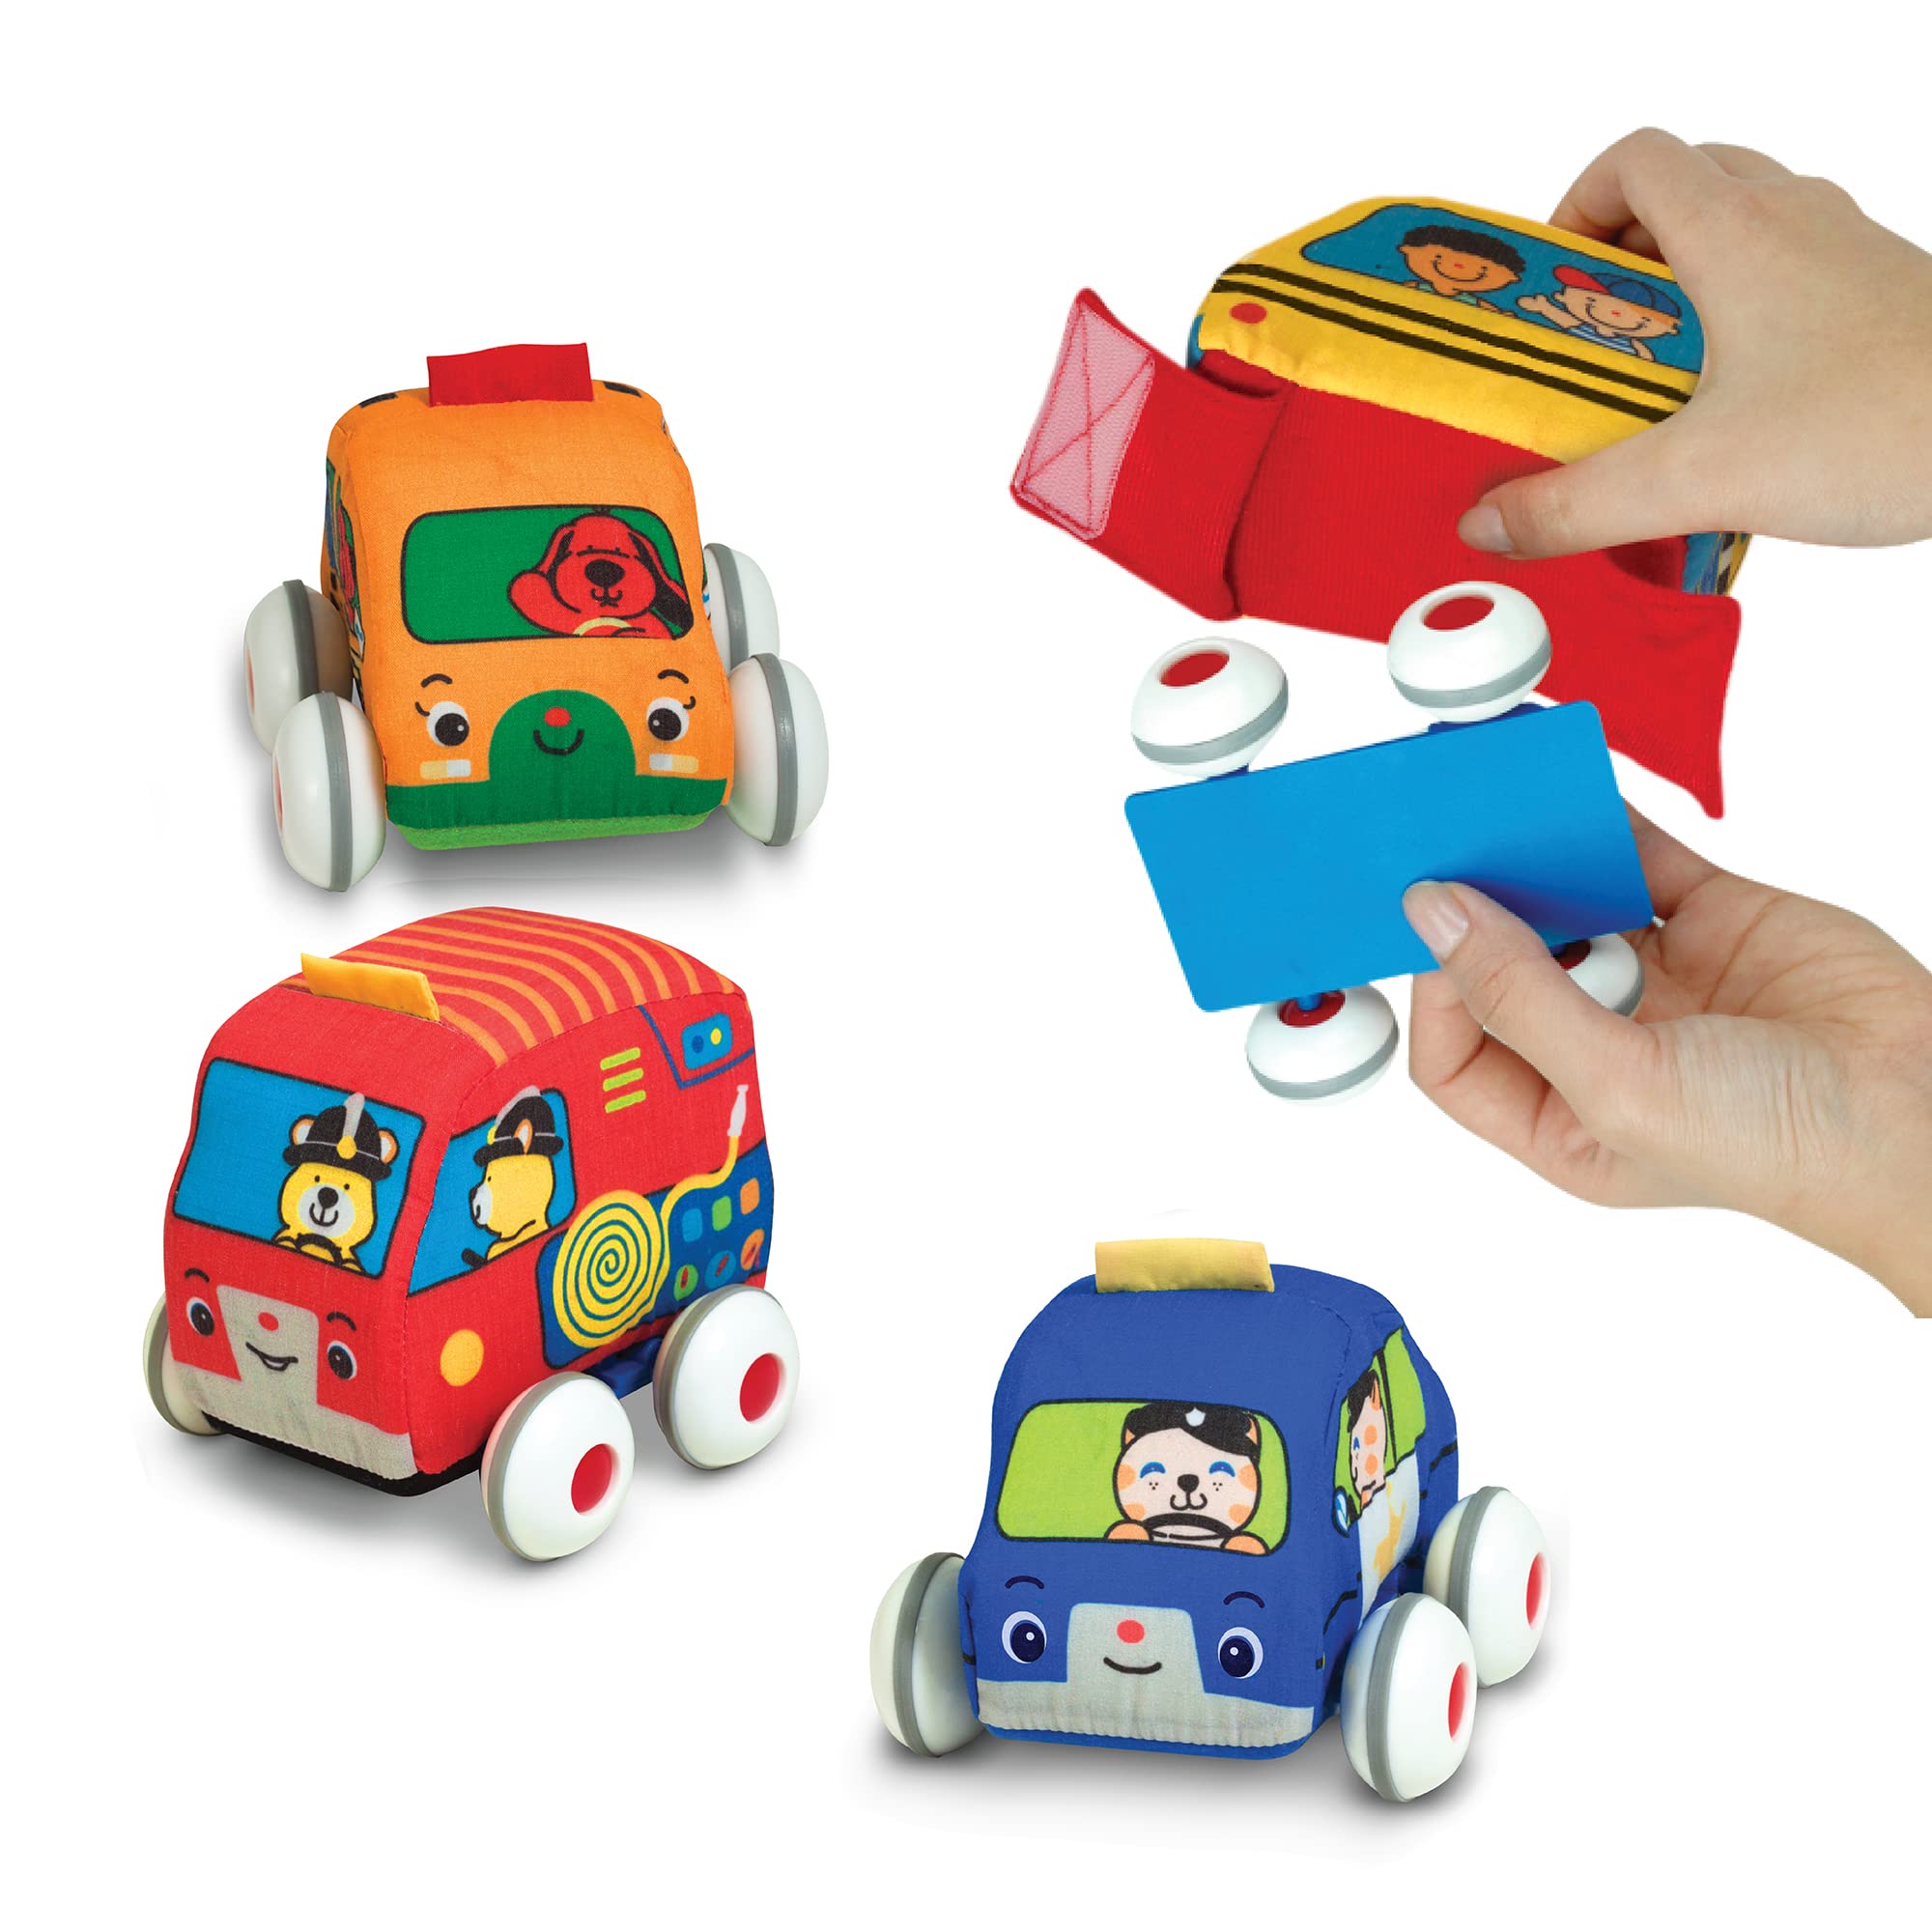 Melissa & Doug K's Kids Pull-Back Vehicle Set - Soft Baby Toy Set With 4 Cars and Trucks and Carrying Case - Pull Back Cars, Toys For Babies And Toddlers